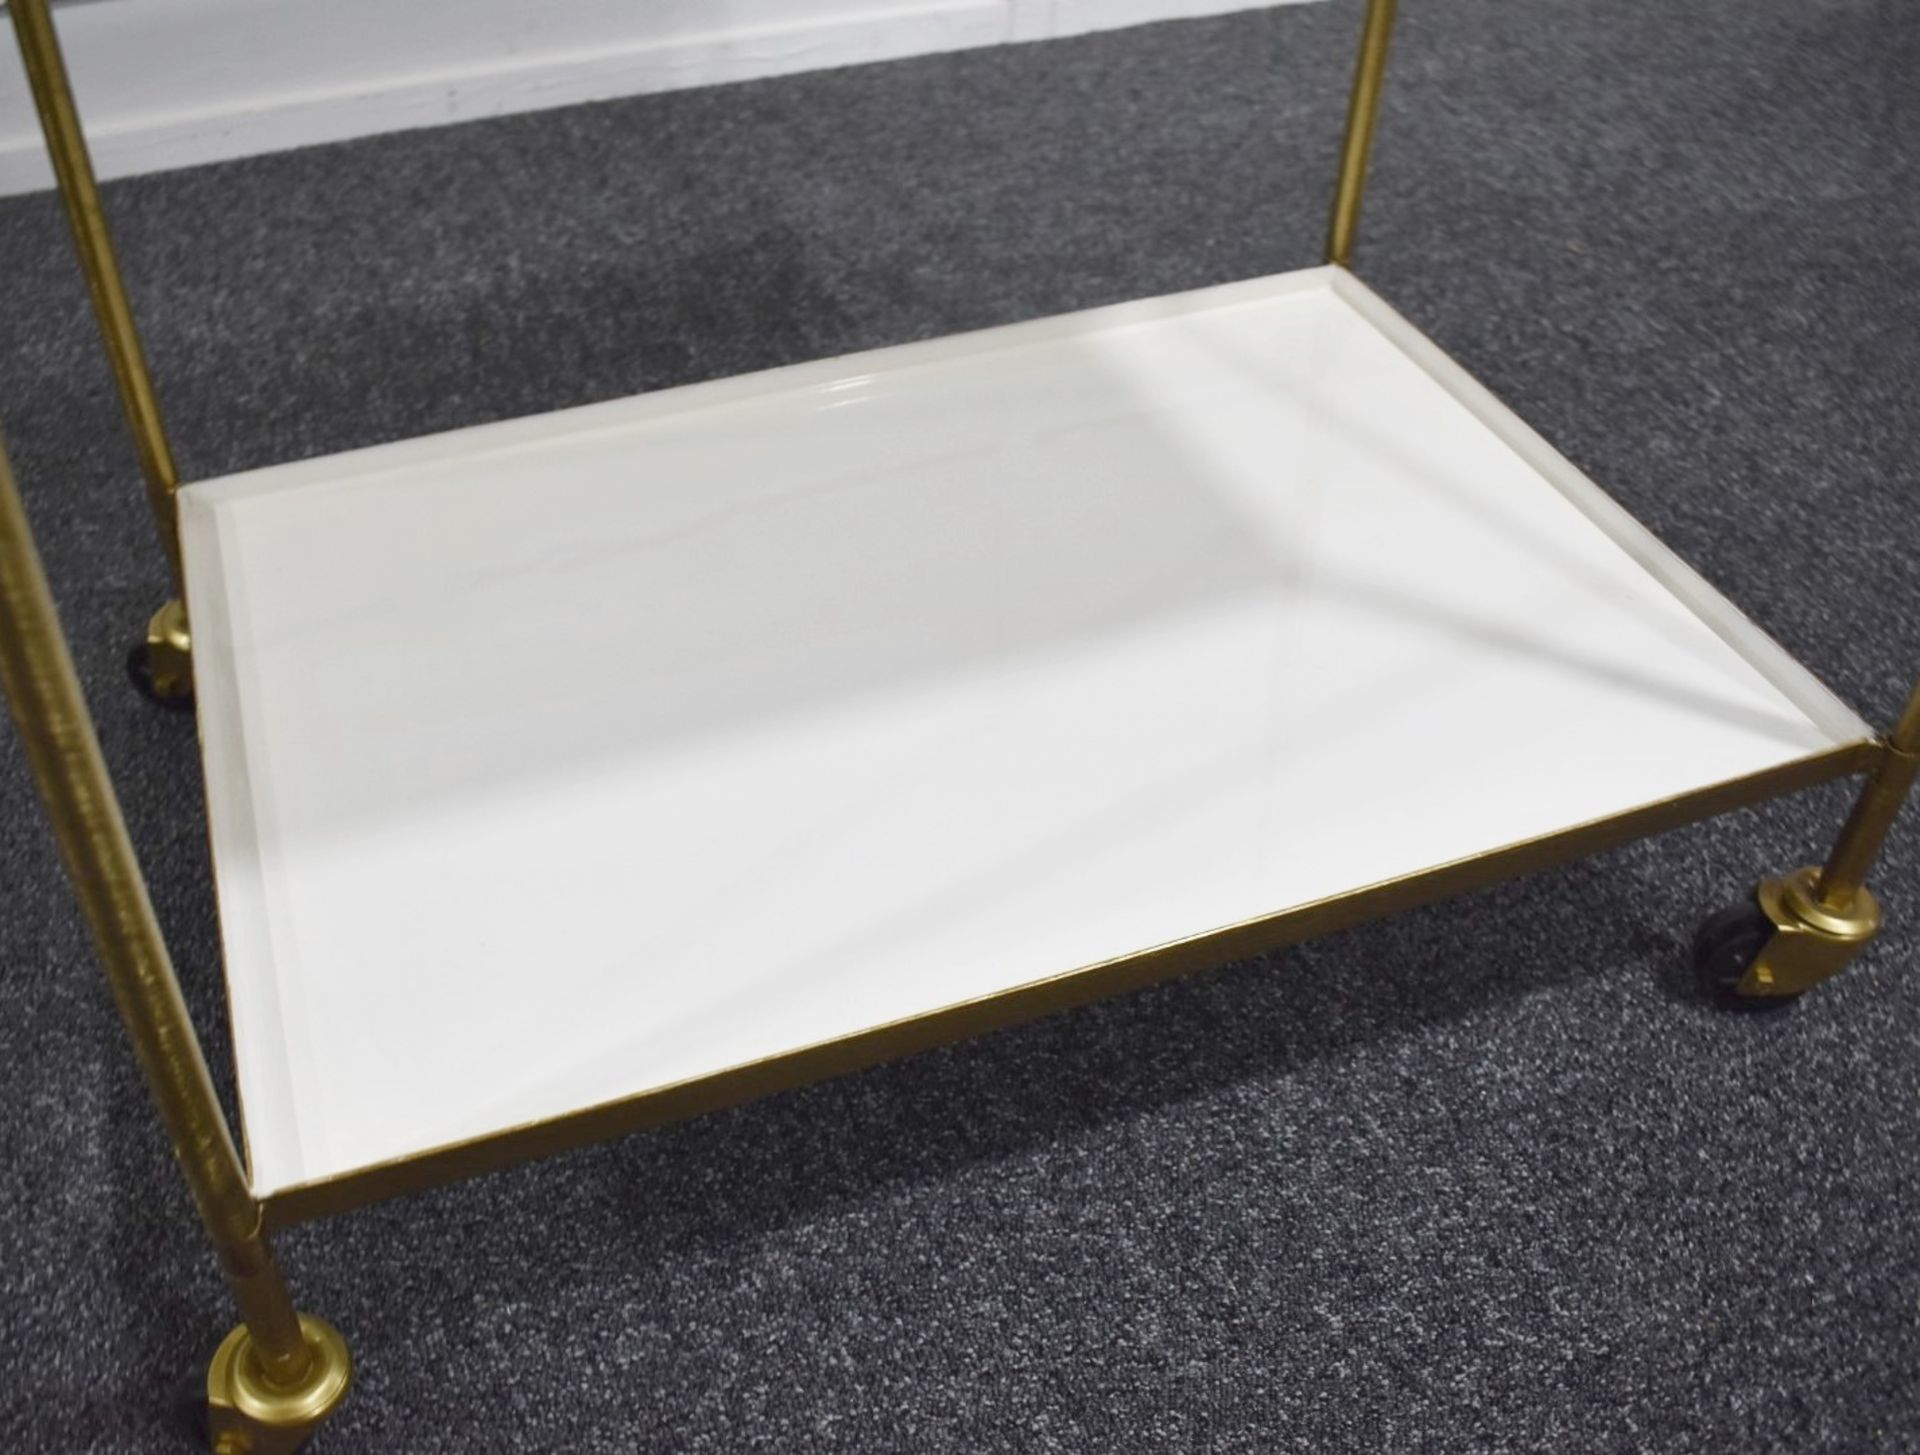 1 x Retro 1960s-style Solid Brass Drink & Dessert Trolley Bar Cart on Castors - Recently Removed - Image 7 of 7